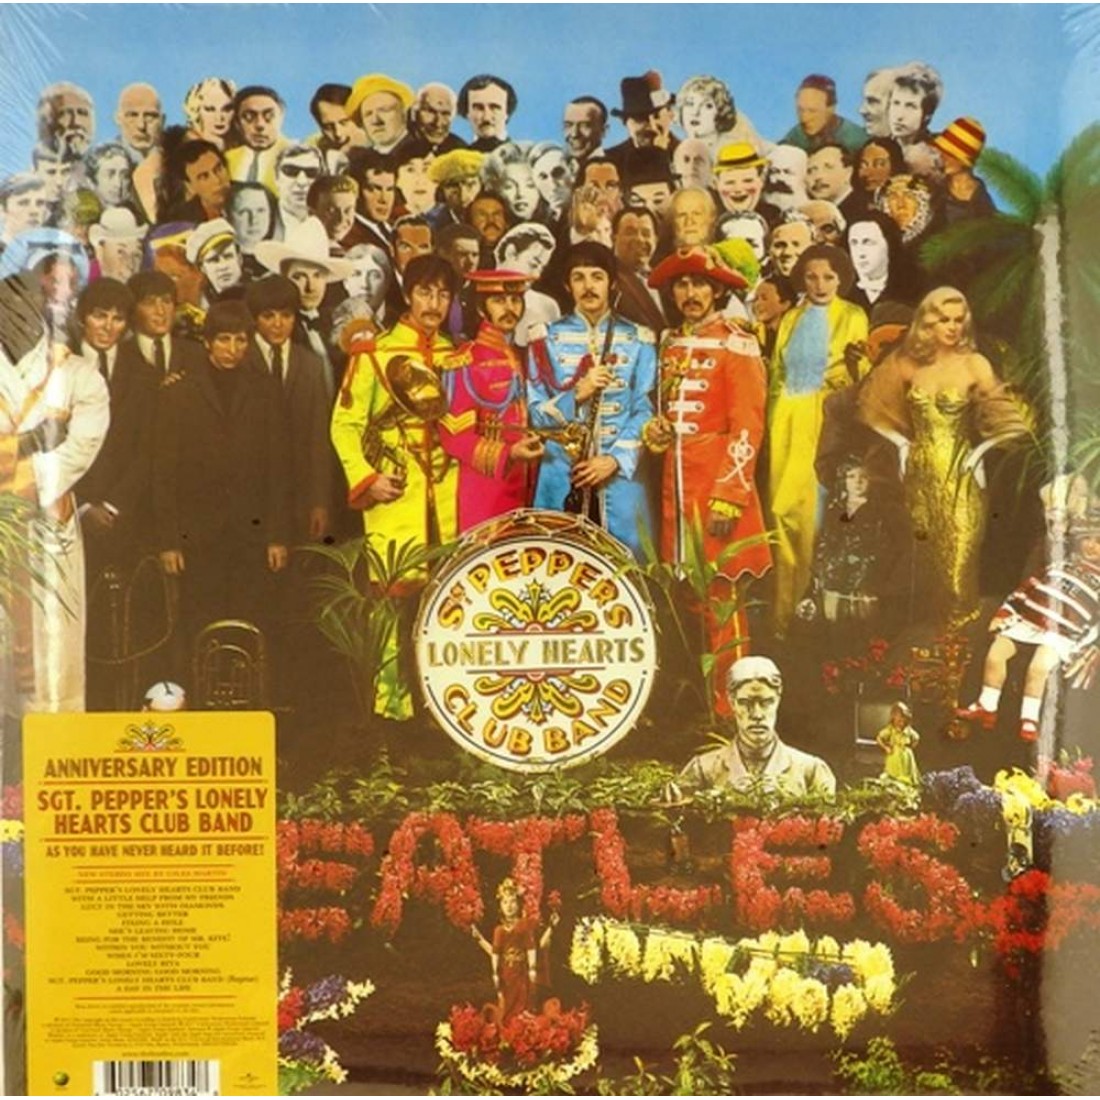 Beatles sgt peppers lonely hearts club. Sgt Pepper's Lonely Hearts Club Band. The Beatles Sgt. Pepper's Lonely Hearts Club Band 1967. Винил пластинка Sgt Pepper. Обложке пластинки Sgt. Pepper's Lonely Hearts Club Band (1967 г.)..